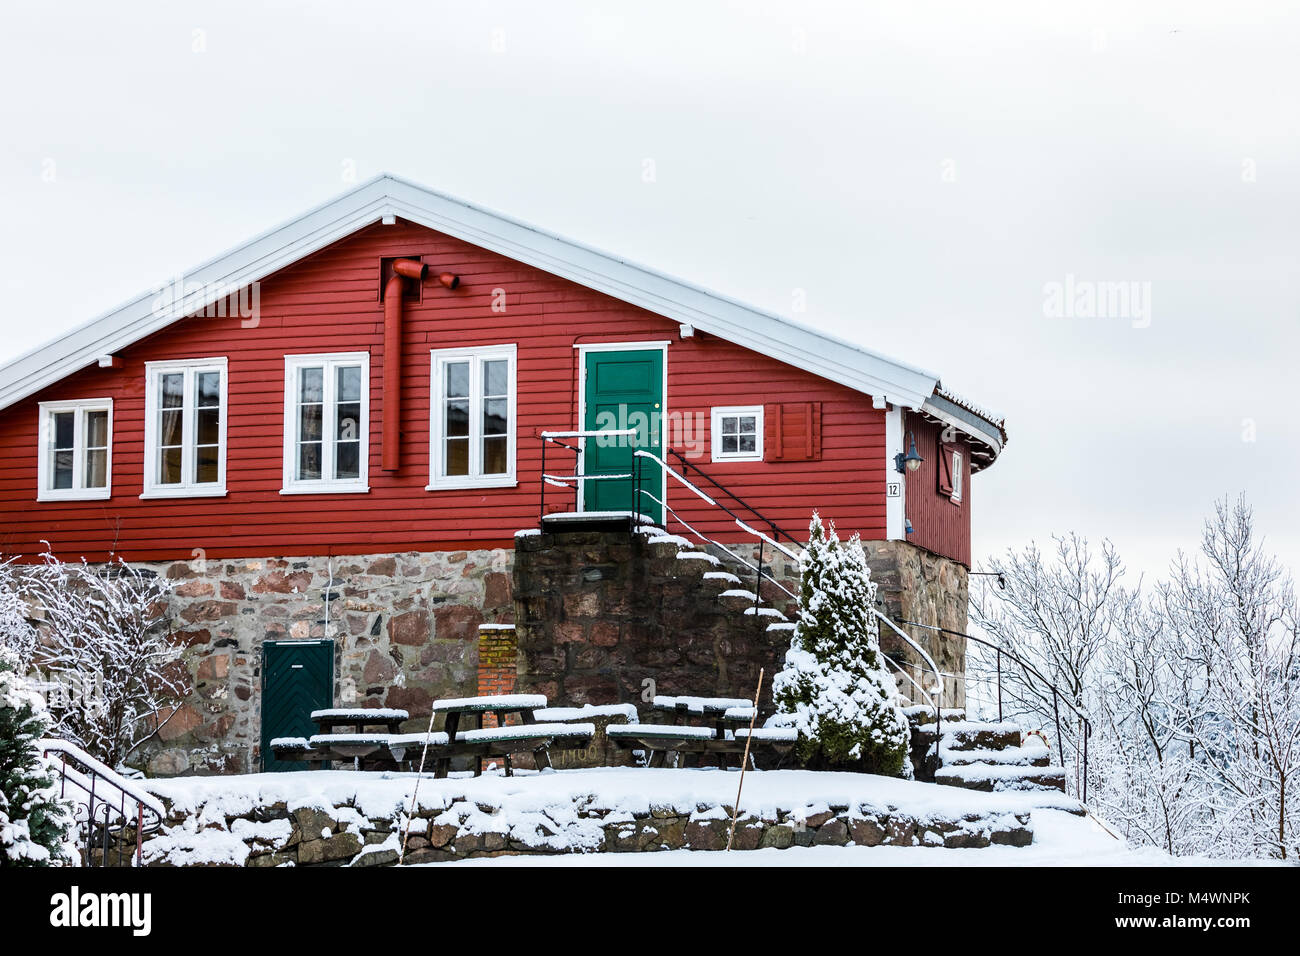 Odderoya in Kristiansand, Norway - January 17, 2018: Krutthuset, the old, red powder house from 1697. Winter, snow on the ground. Stock Photo